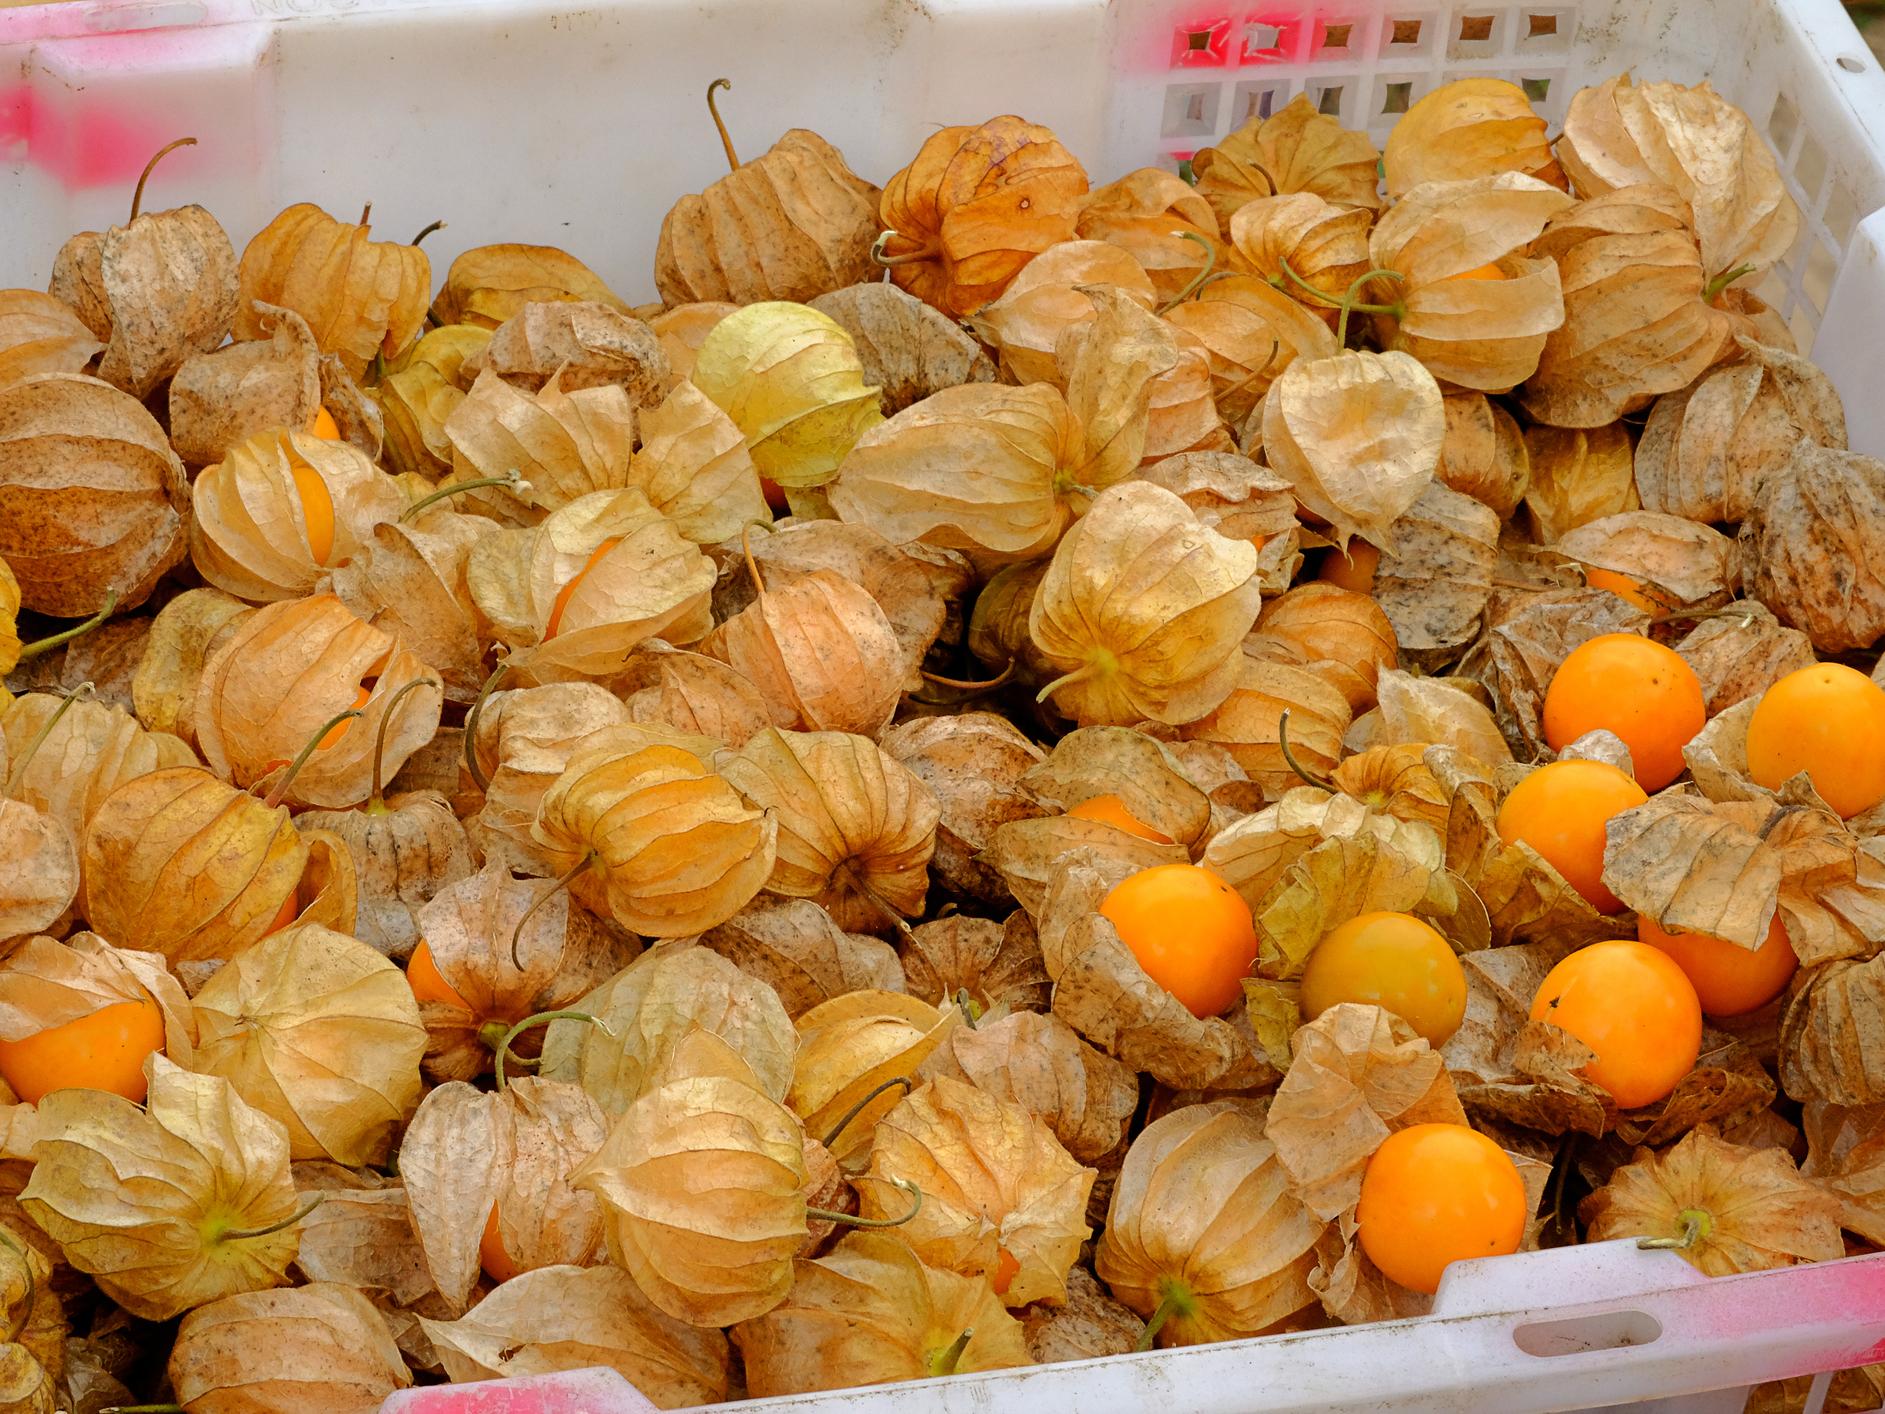 Also known as physalis, the fruit is widely grown on small, local scales but has never entered mainstream farming